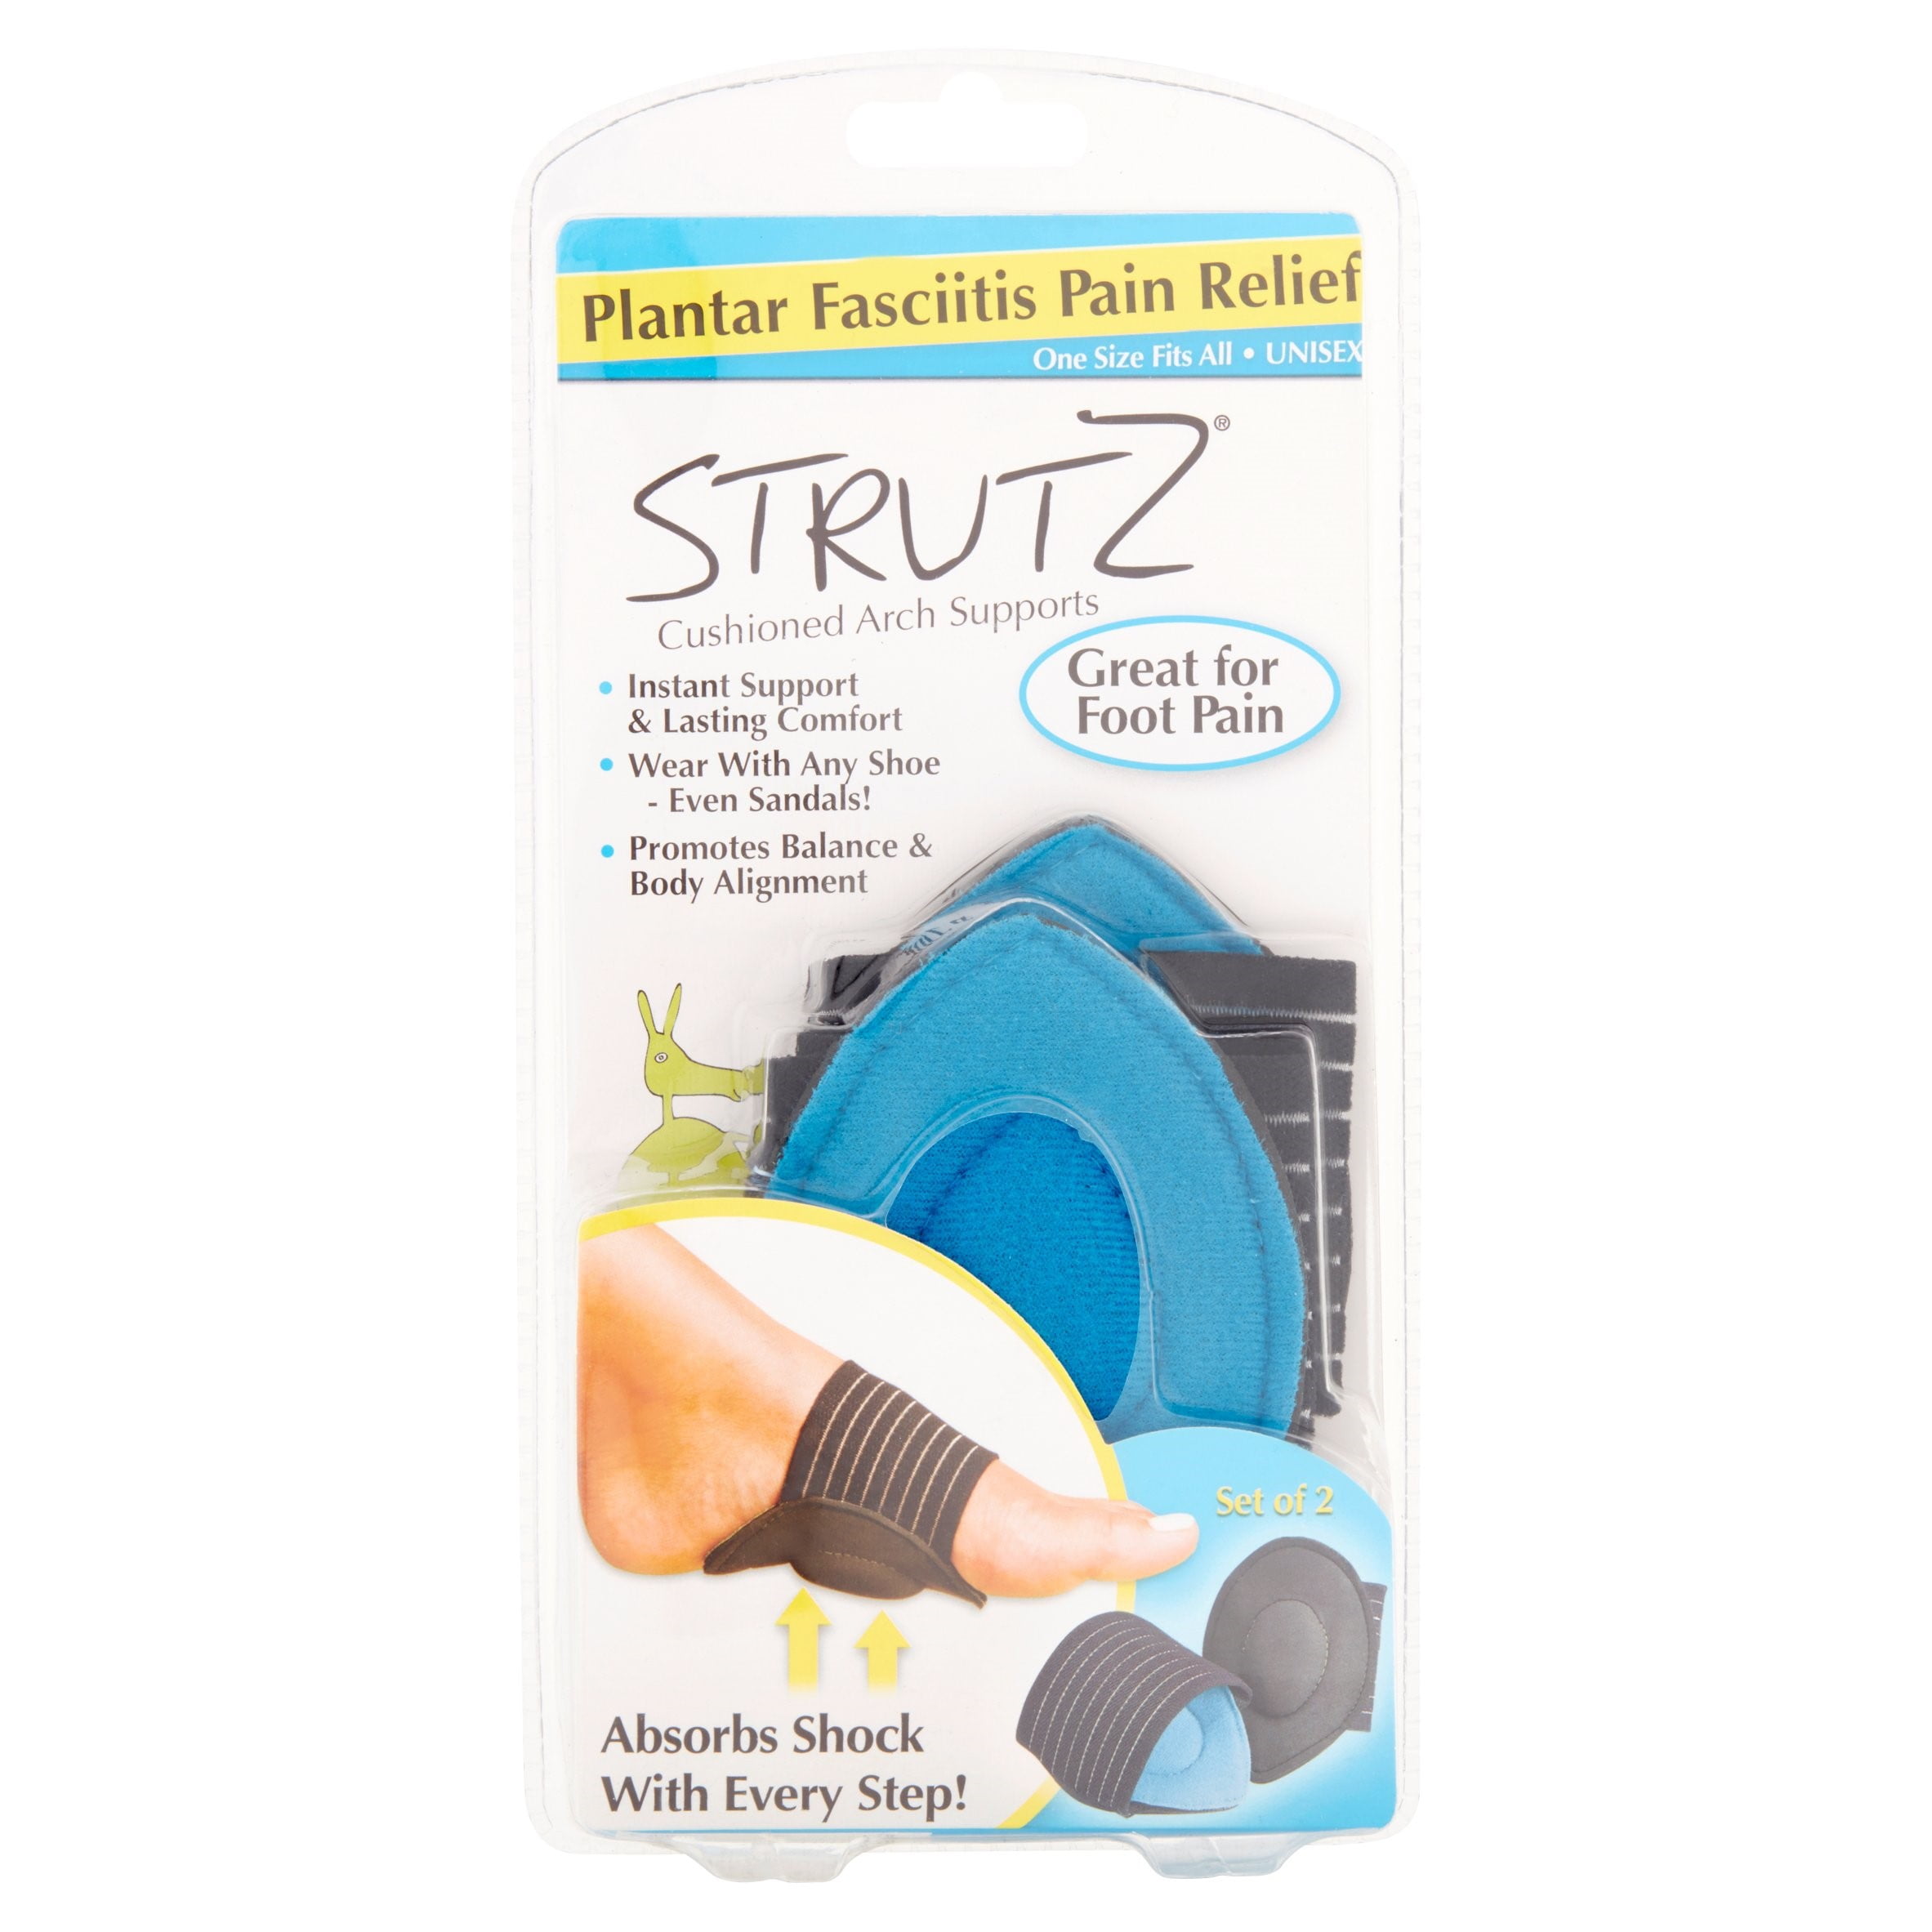 Strutz Cushioned Arch Supports, 2 Count